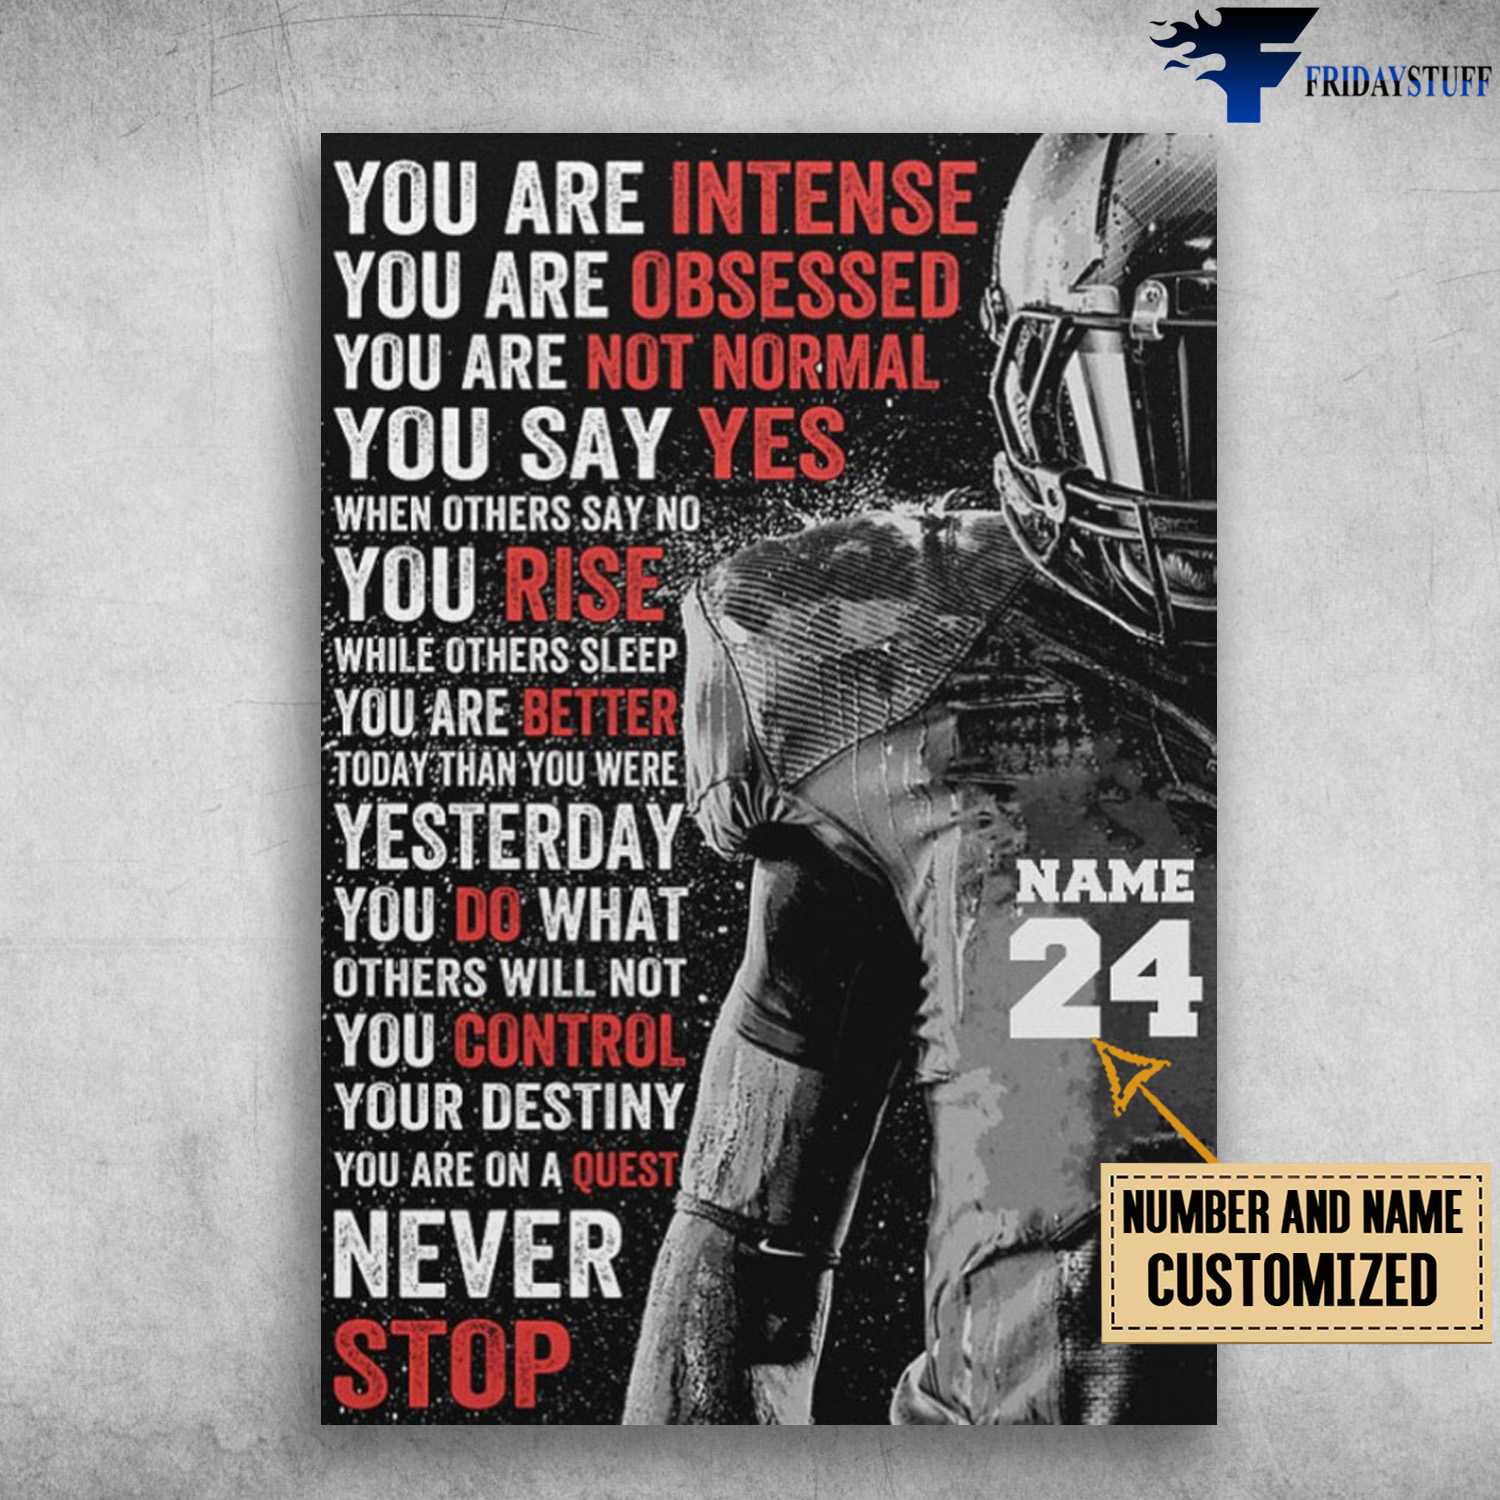 Football Lover, Football Poster, You Are Intense, You Are Onsessed, You Are Not Normal, You Say Yes, When Others Say No, You Rise While Others Sleep, You Are Better Today Than You Were Yesterday